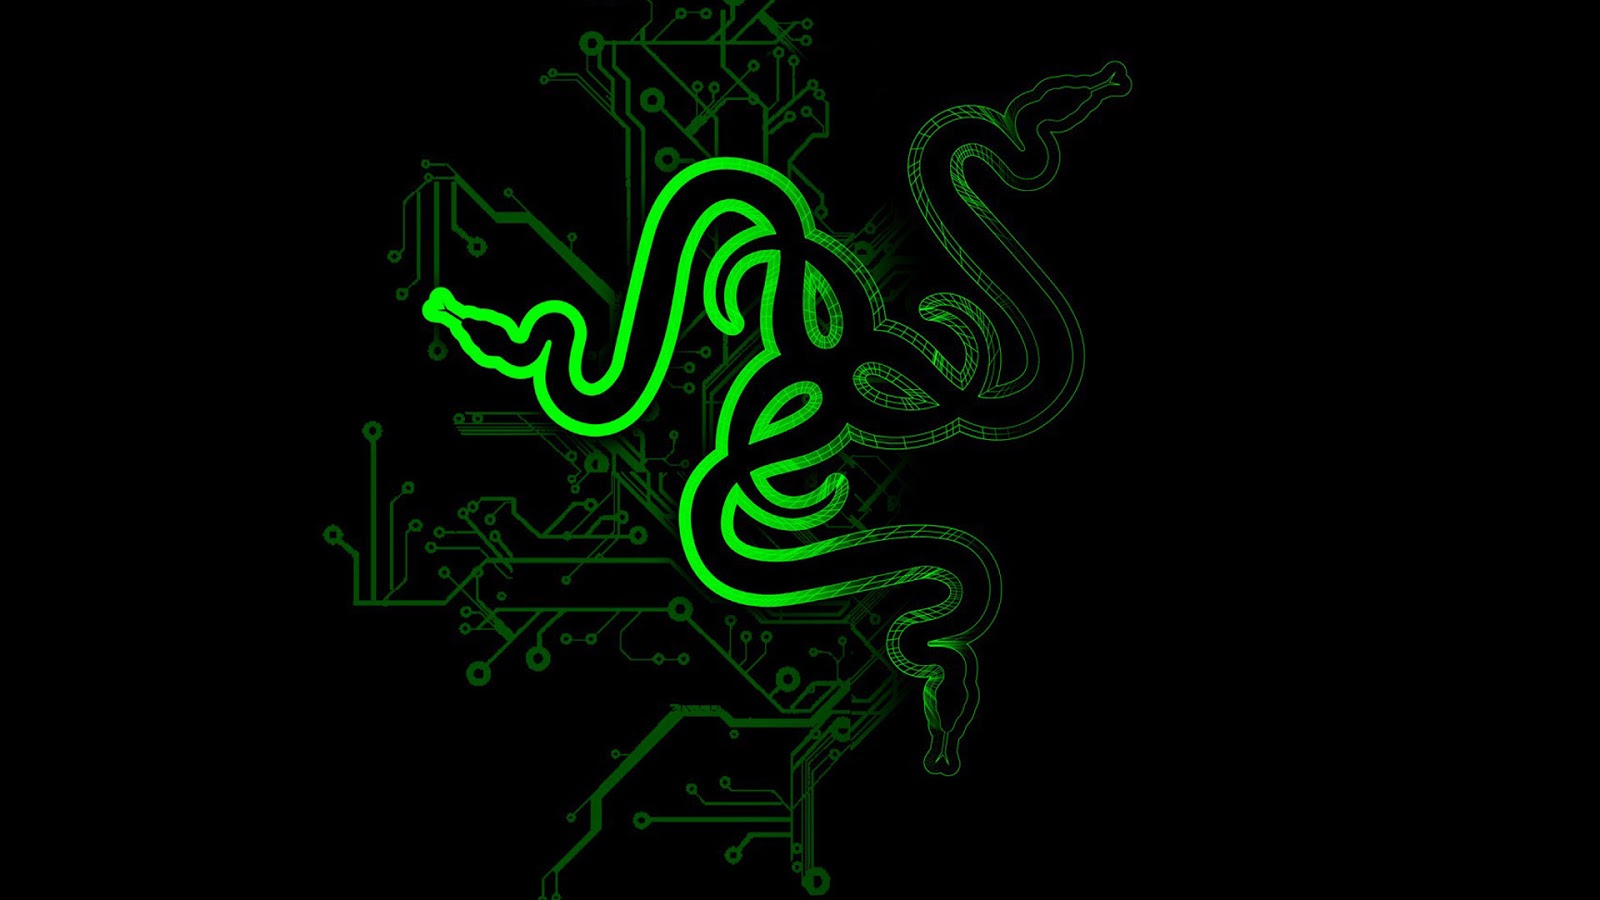 Razer Blade HD wallpapers | HD Wallpapers (High Definition) | Free Background